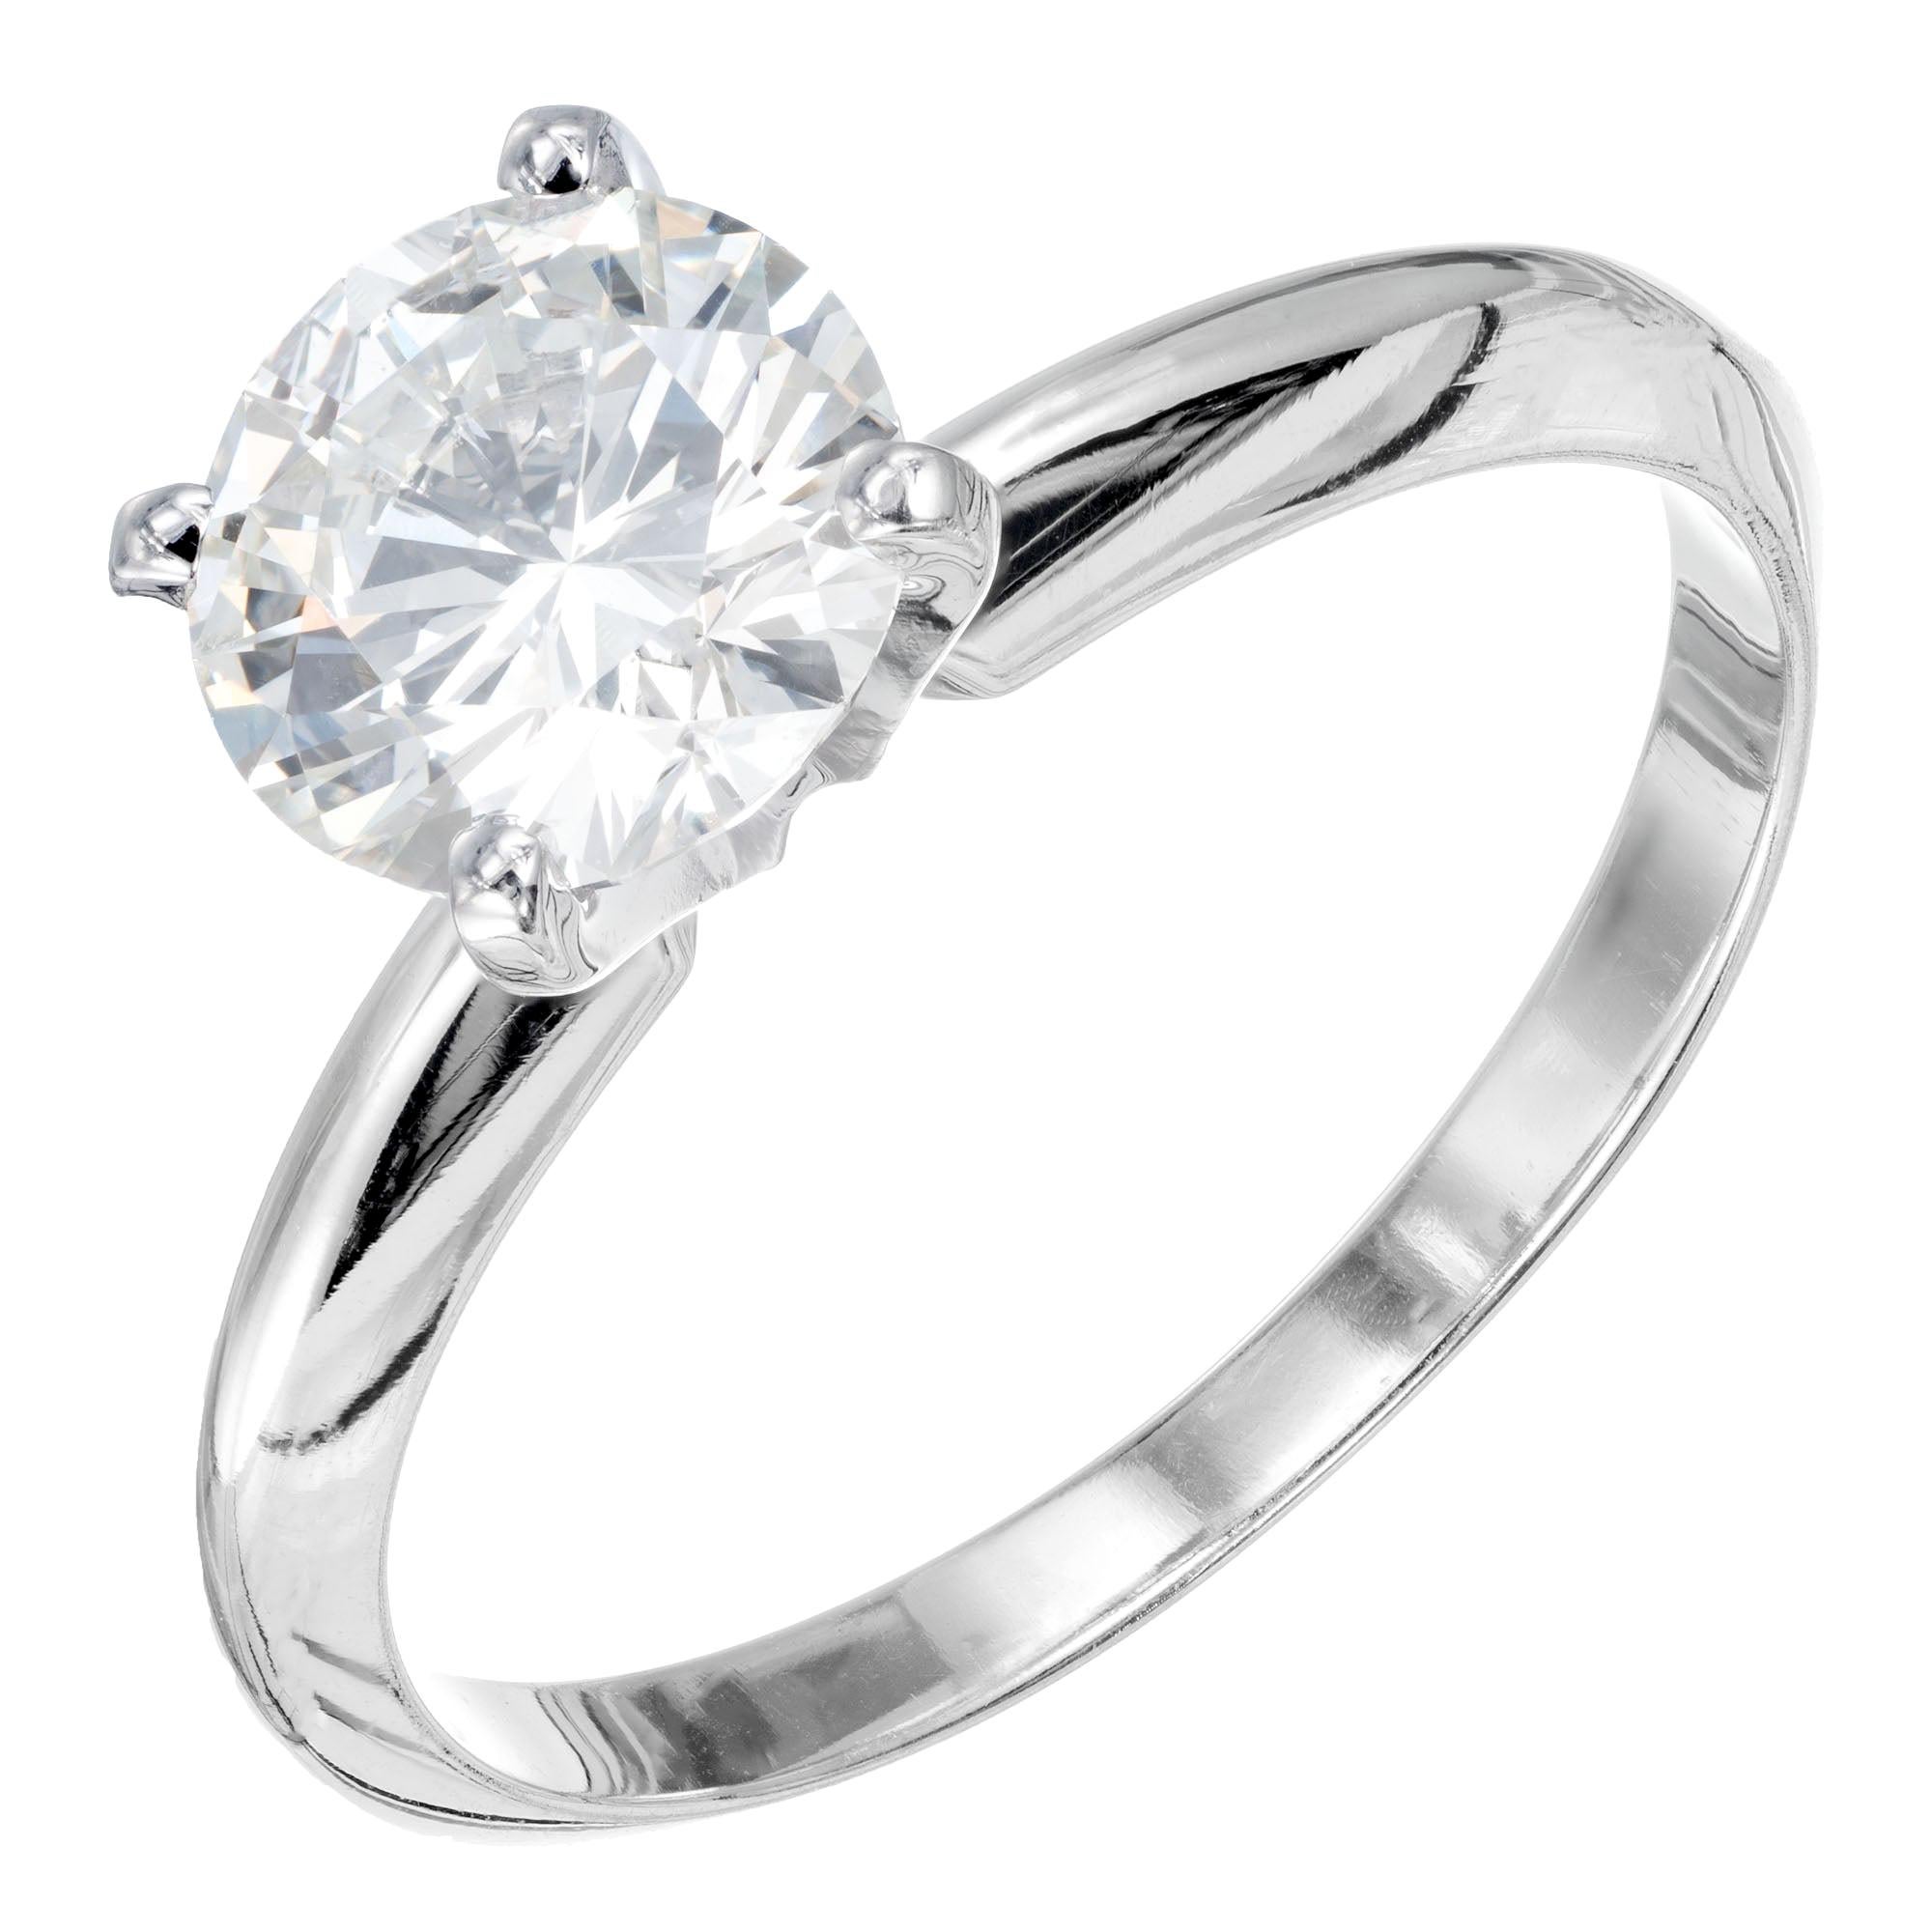 EGL Certified 1.15 Carat Diamond White Gold Solitaire Engagement Ring